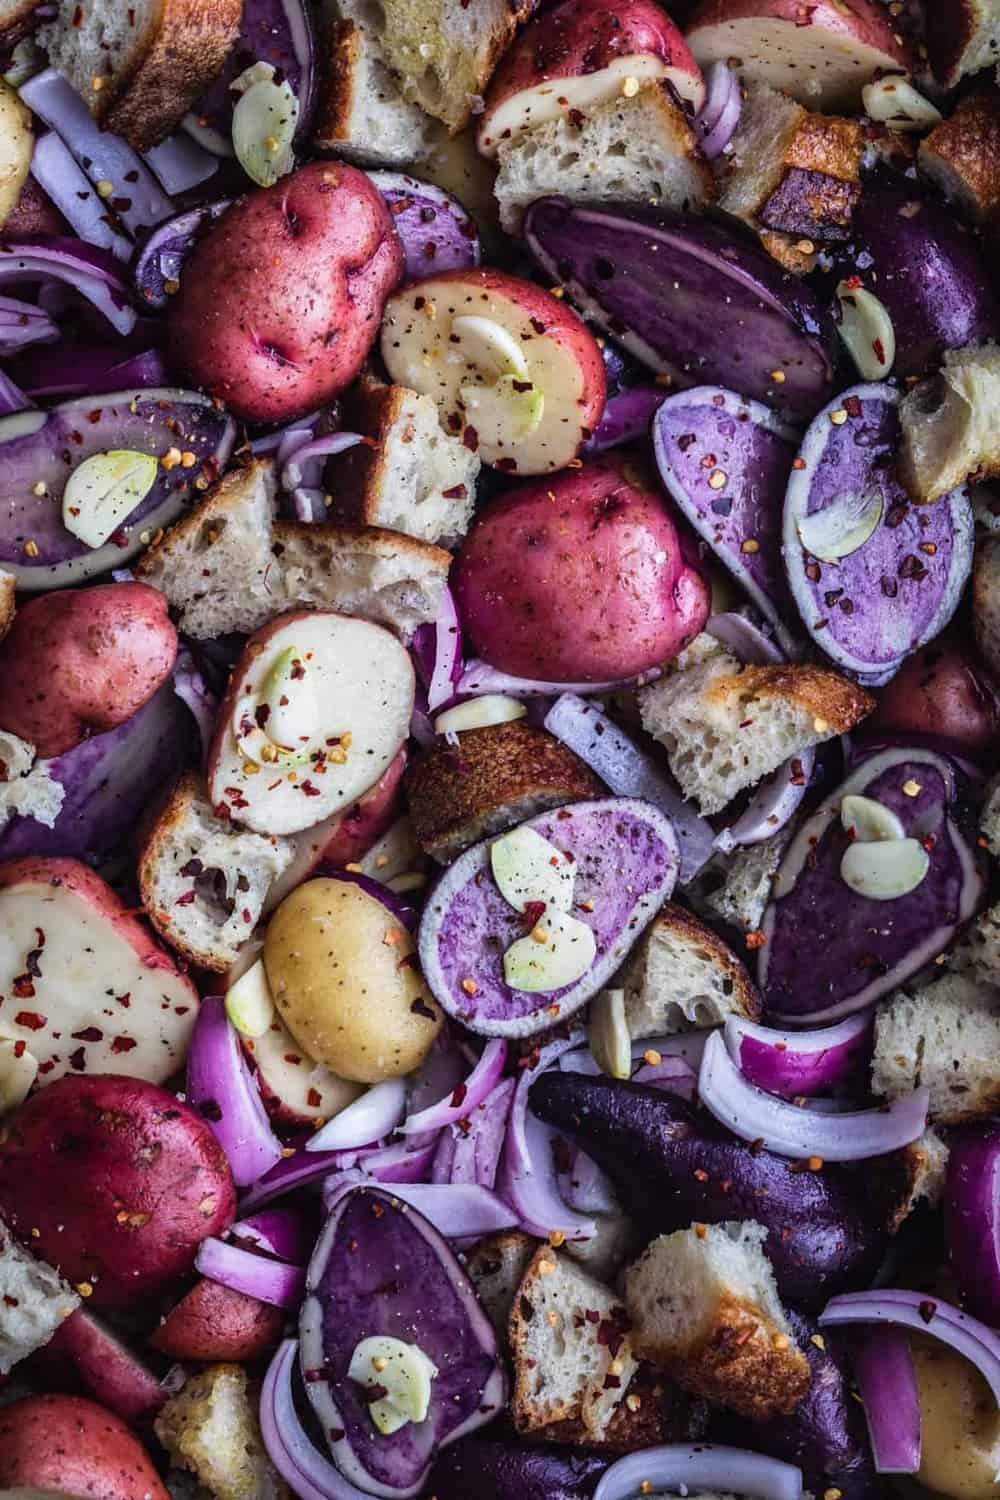 The potatoes and bread cubes cut up with garlic slices, red onion, and chili flakes.